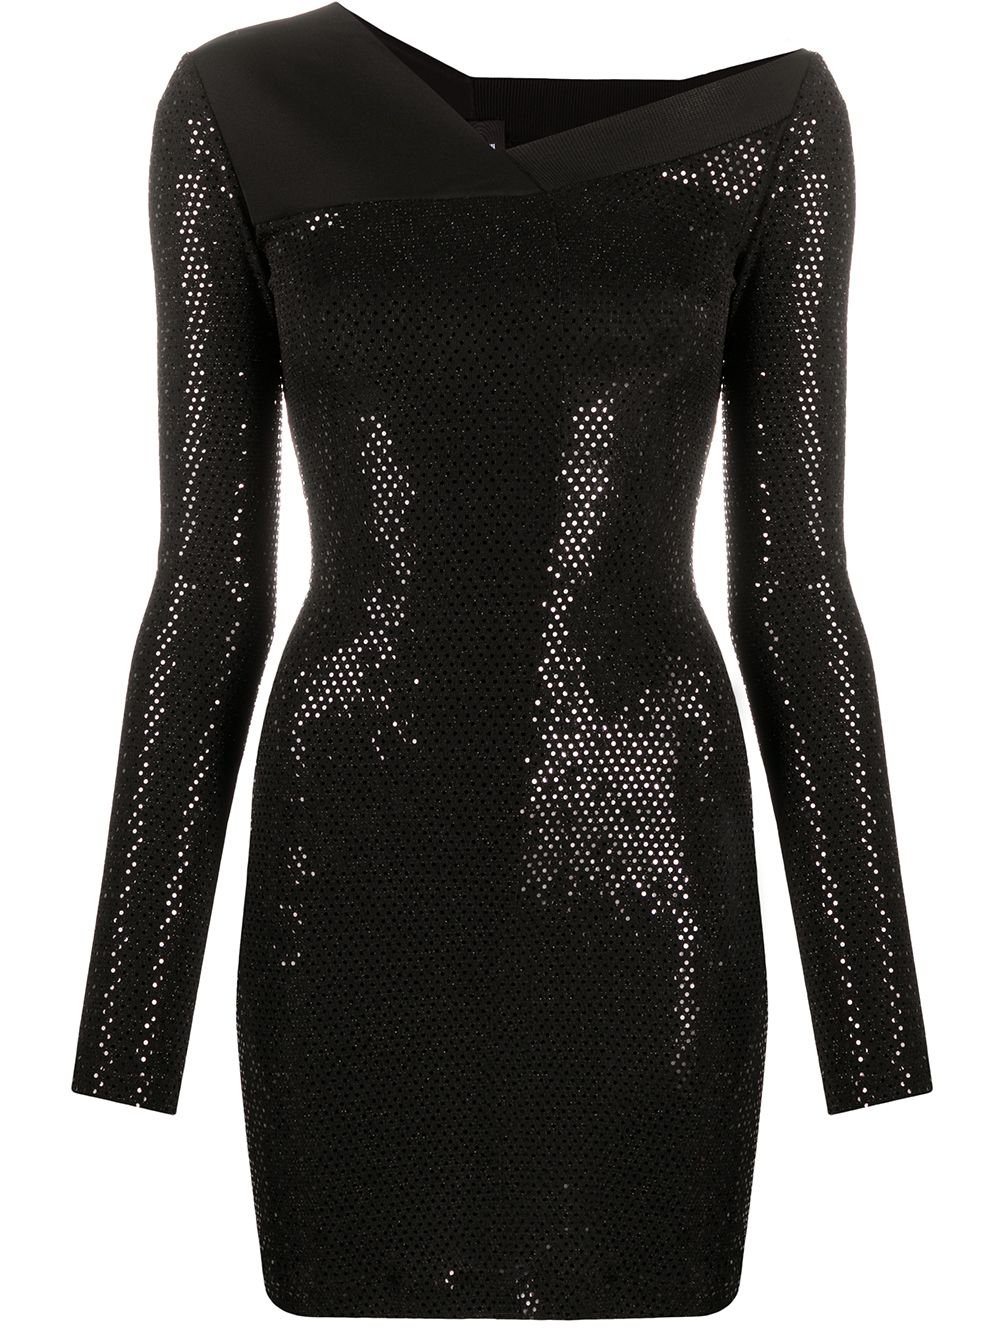 Just Cavalli Embellished Fitted Dress - Farfetch